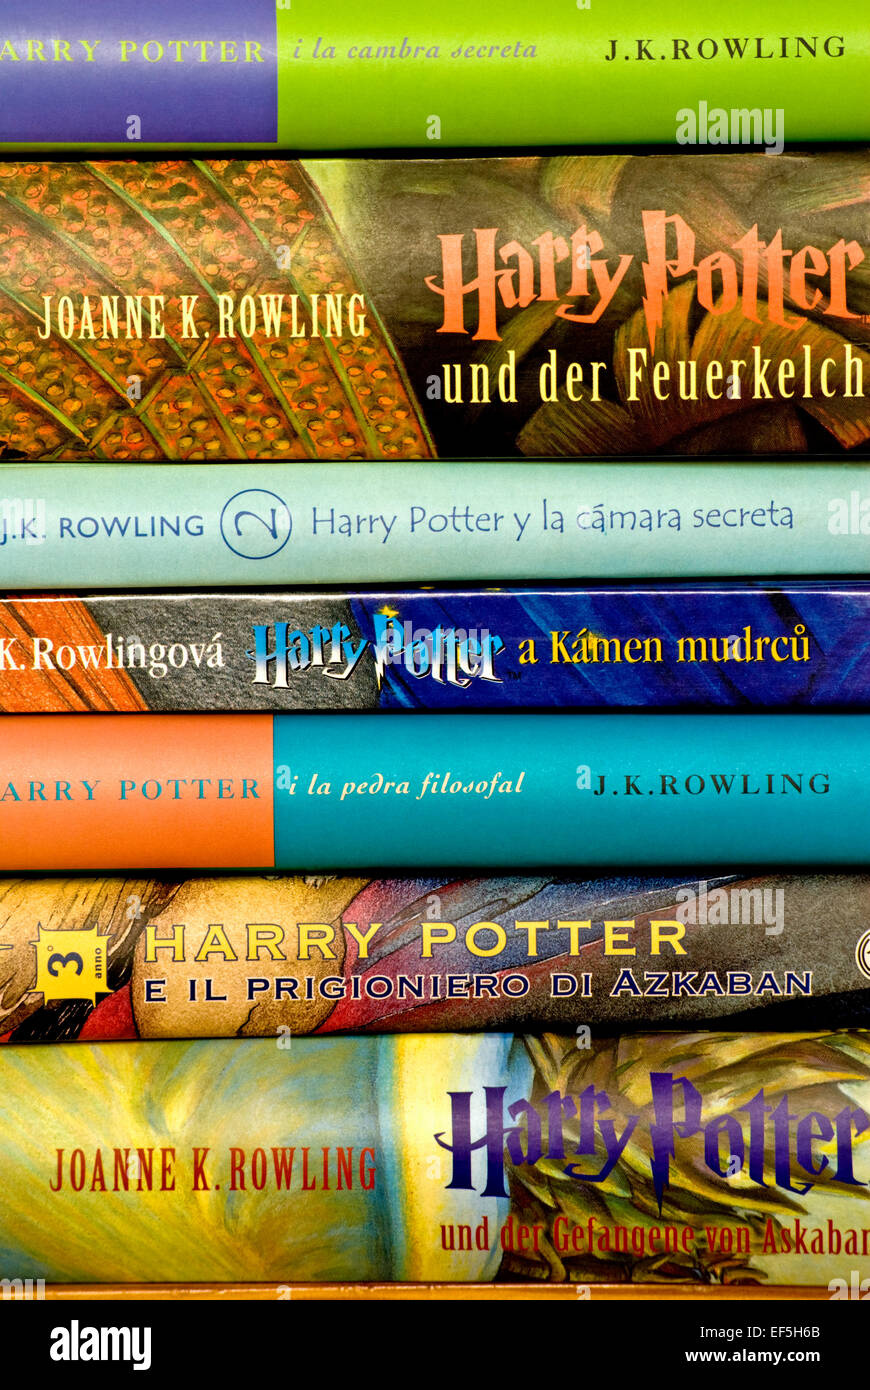 J K Rowling's Harry Potter books in foreign translations (from top: Catalan, German, Spanish, Czech, Catalan, Italian, German) Stock Photo